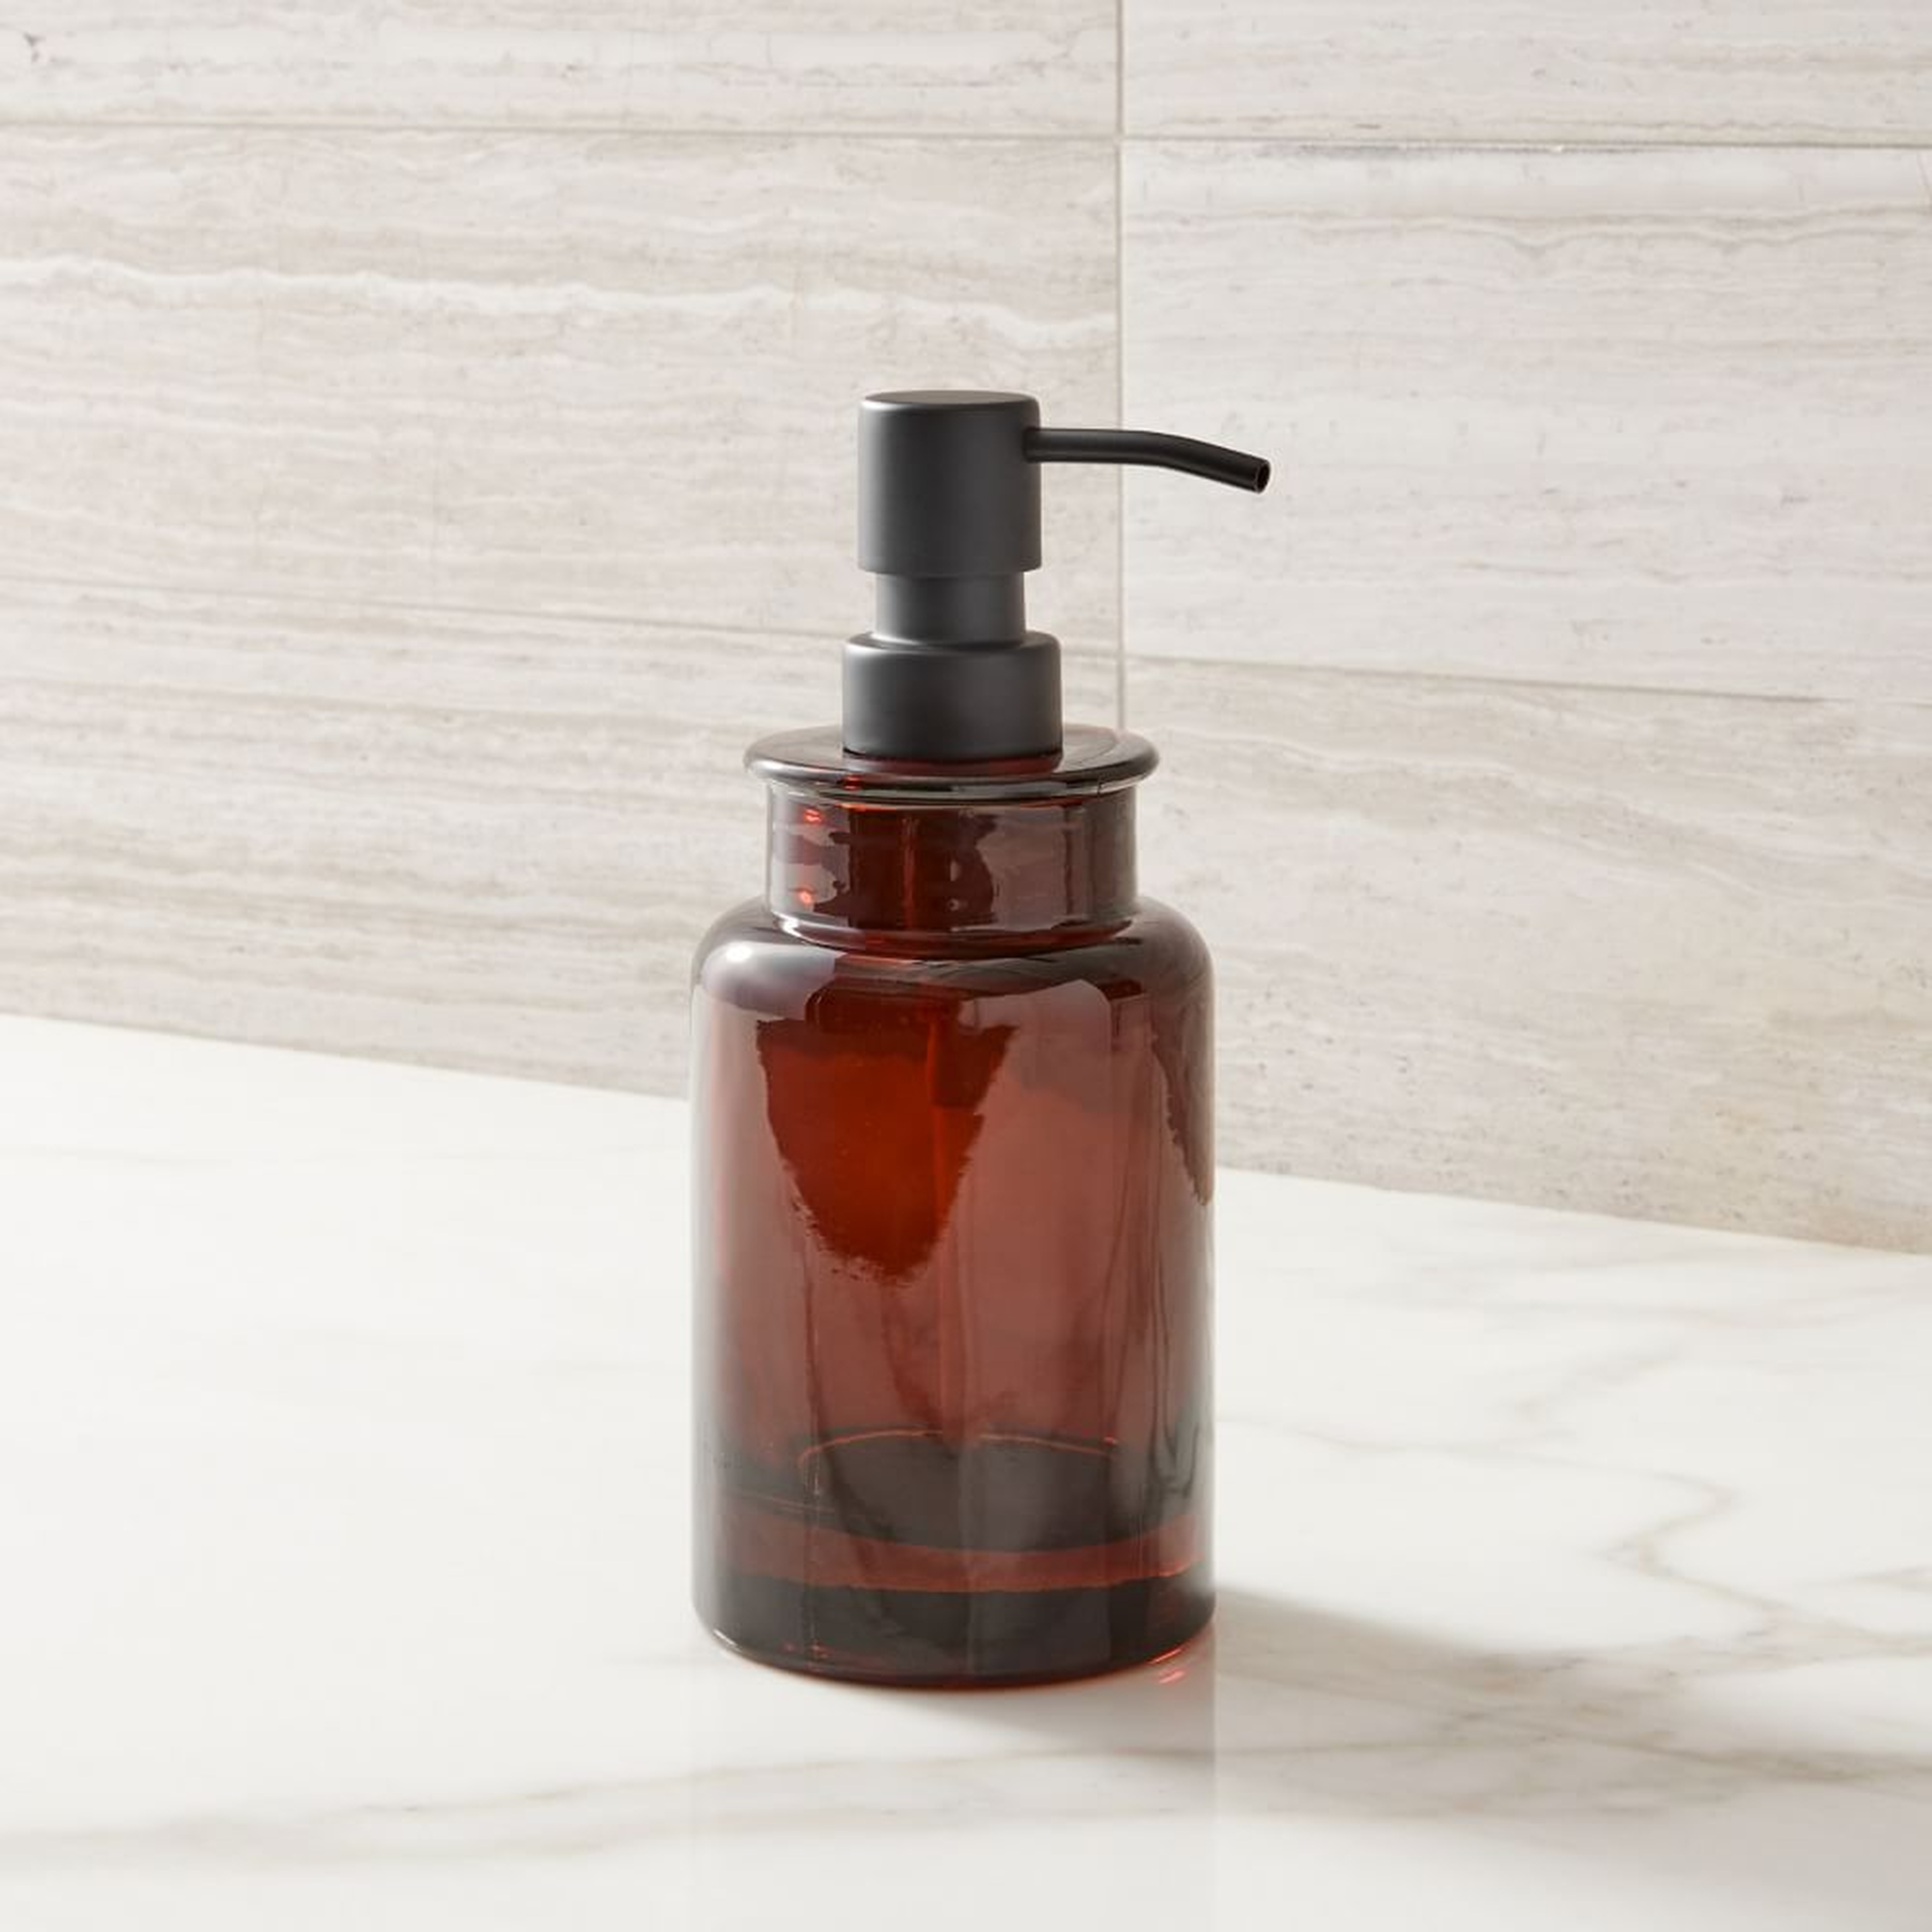 Apothecary Glass Bath Accessories, Amber, Soap Pump - West Elm